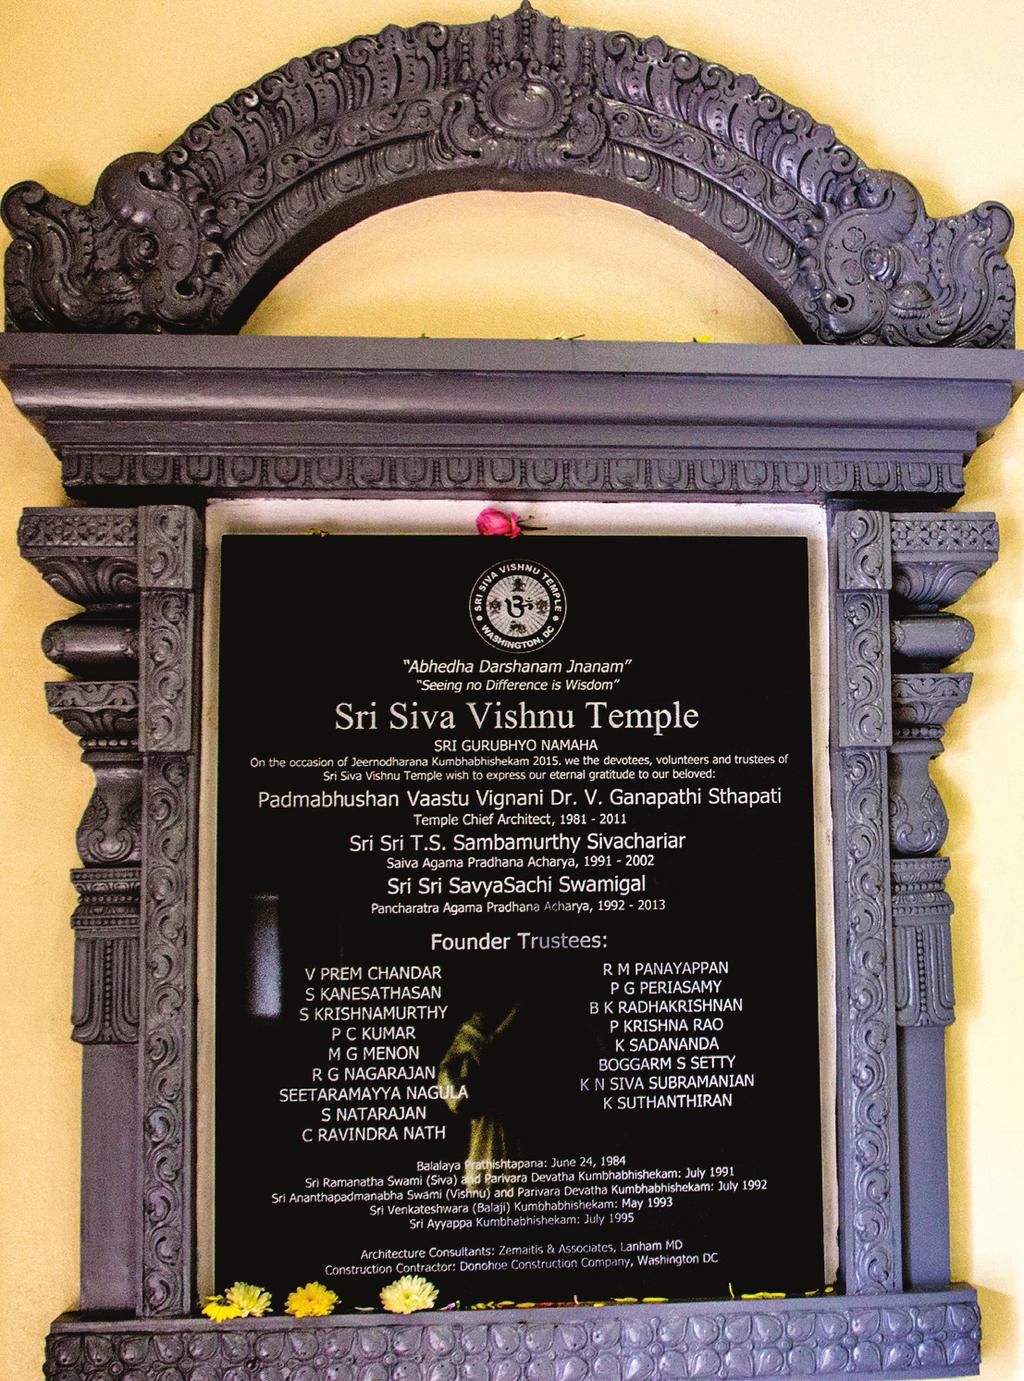 The plaque is situated on the South wall inside the Rajagopuram front entrance to the temple.